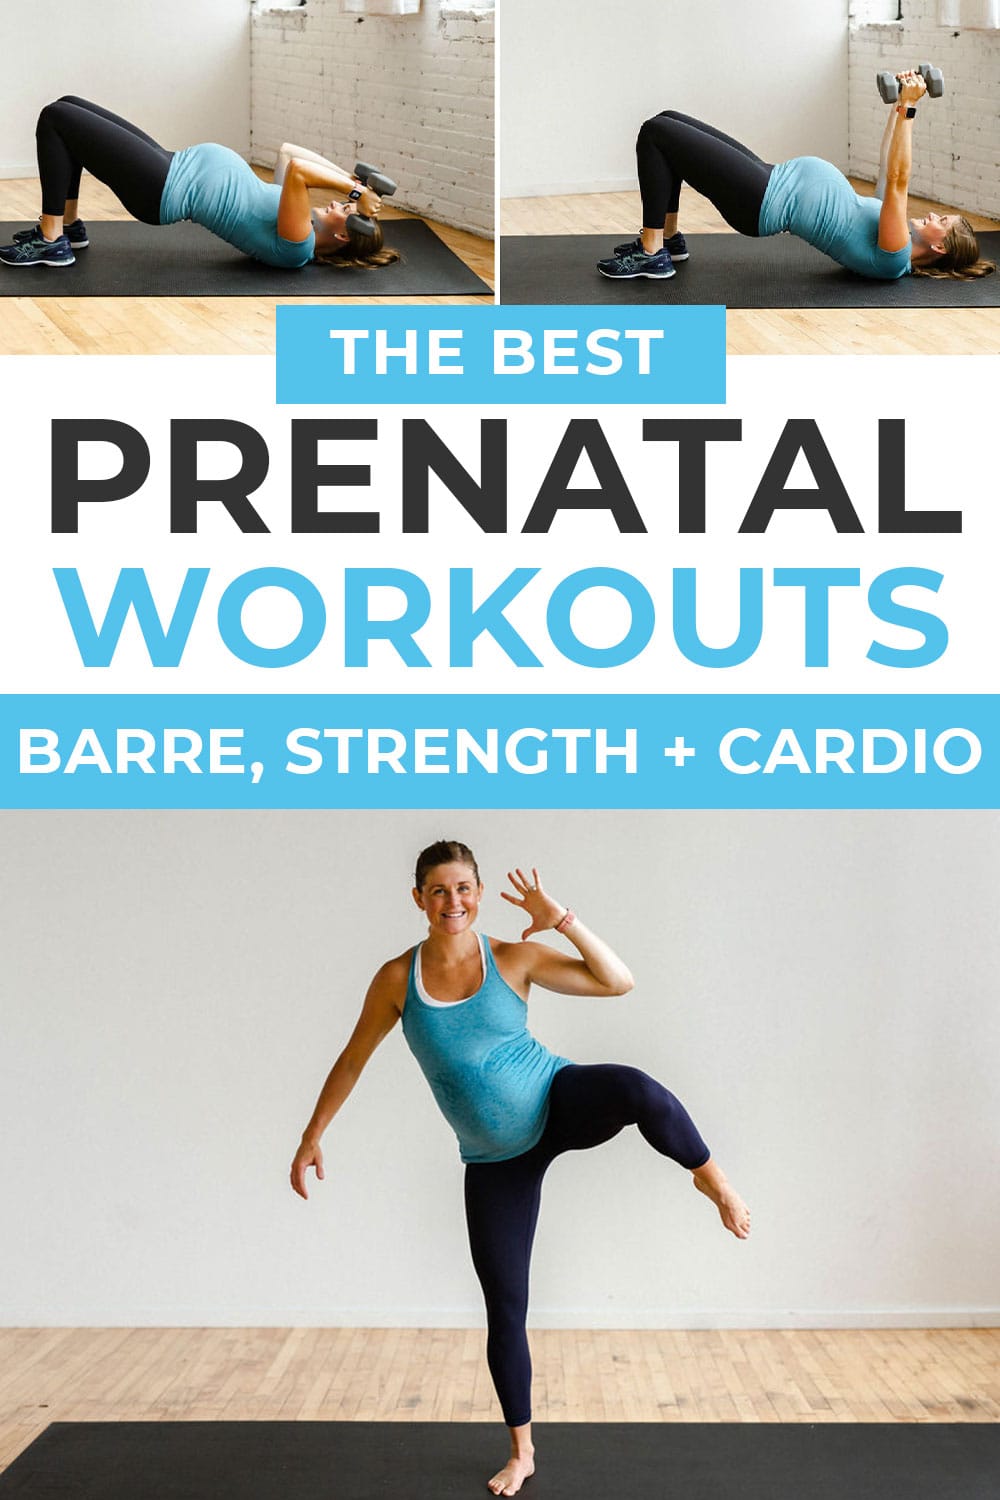 Simple 10 minute prenatal workout for Push Pull Legs